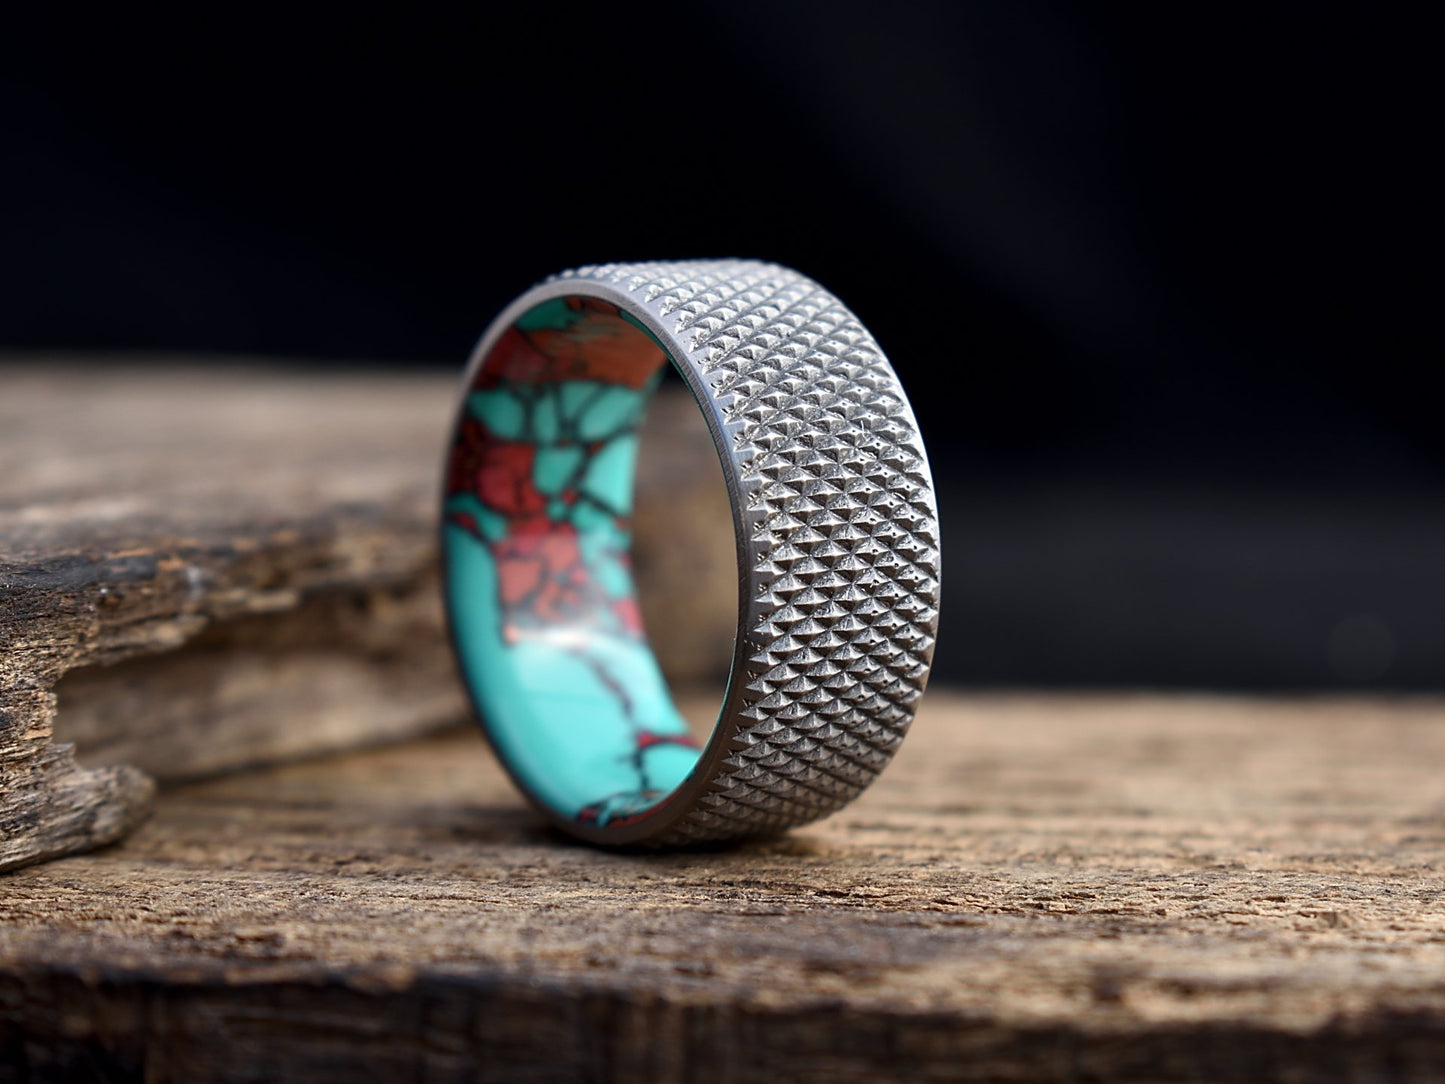 Knurled titanium mens wedding band with turquoise tru stone liner